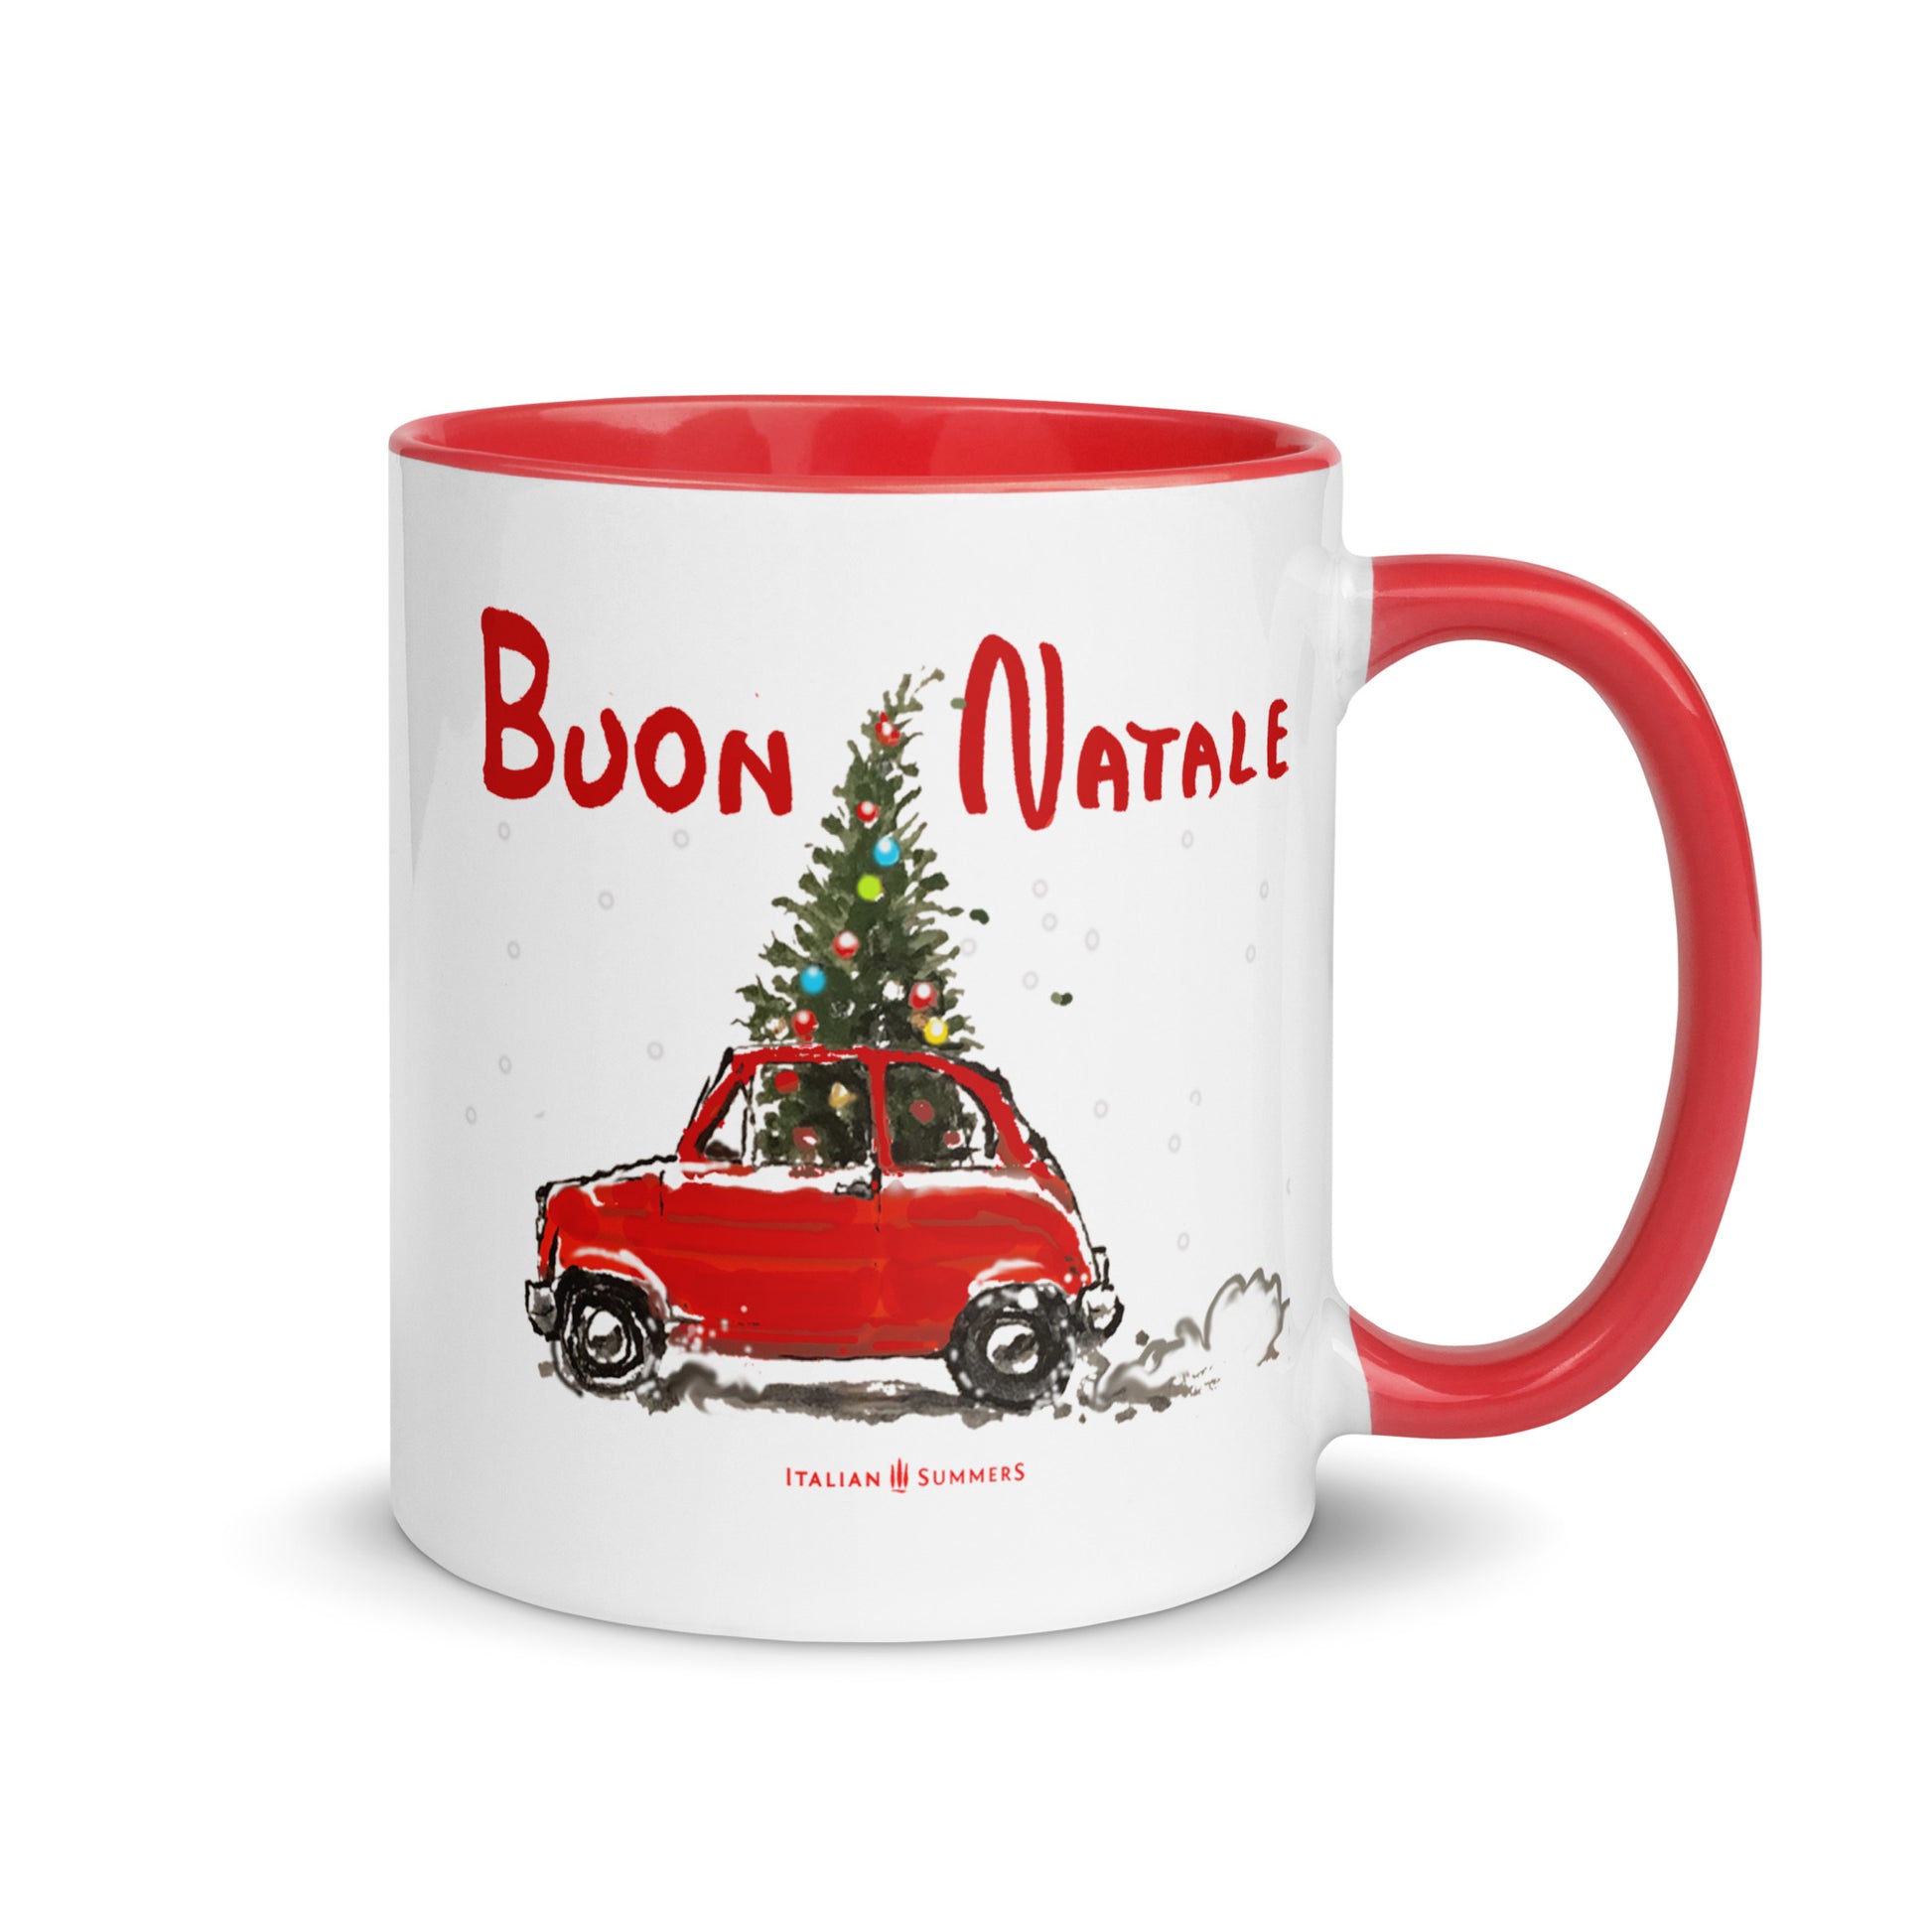 This ceramic Italy Christmas mug features a delightful red vintage Fiat 500 with a Christmas tree sticking out from the roof 